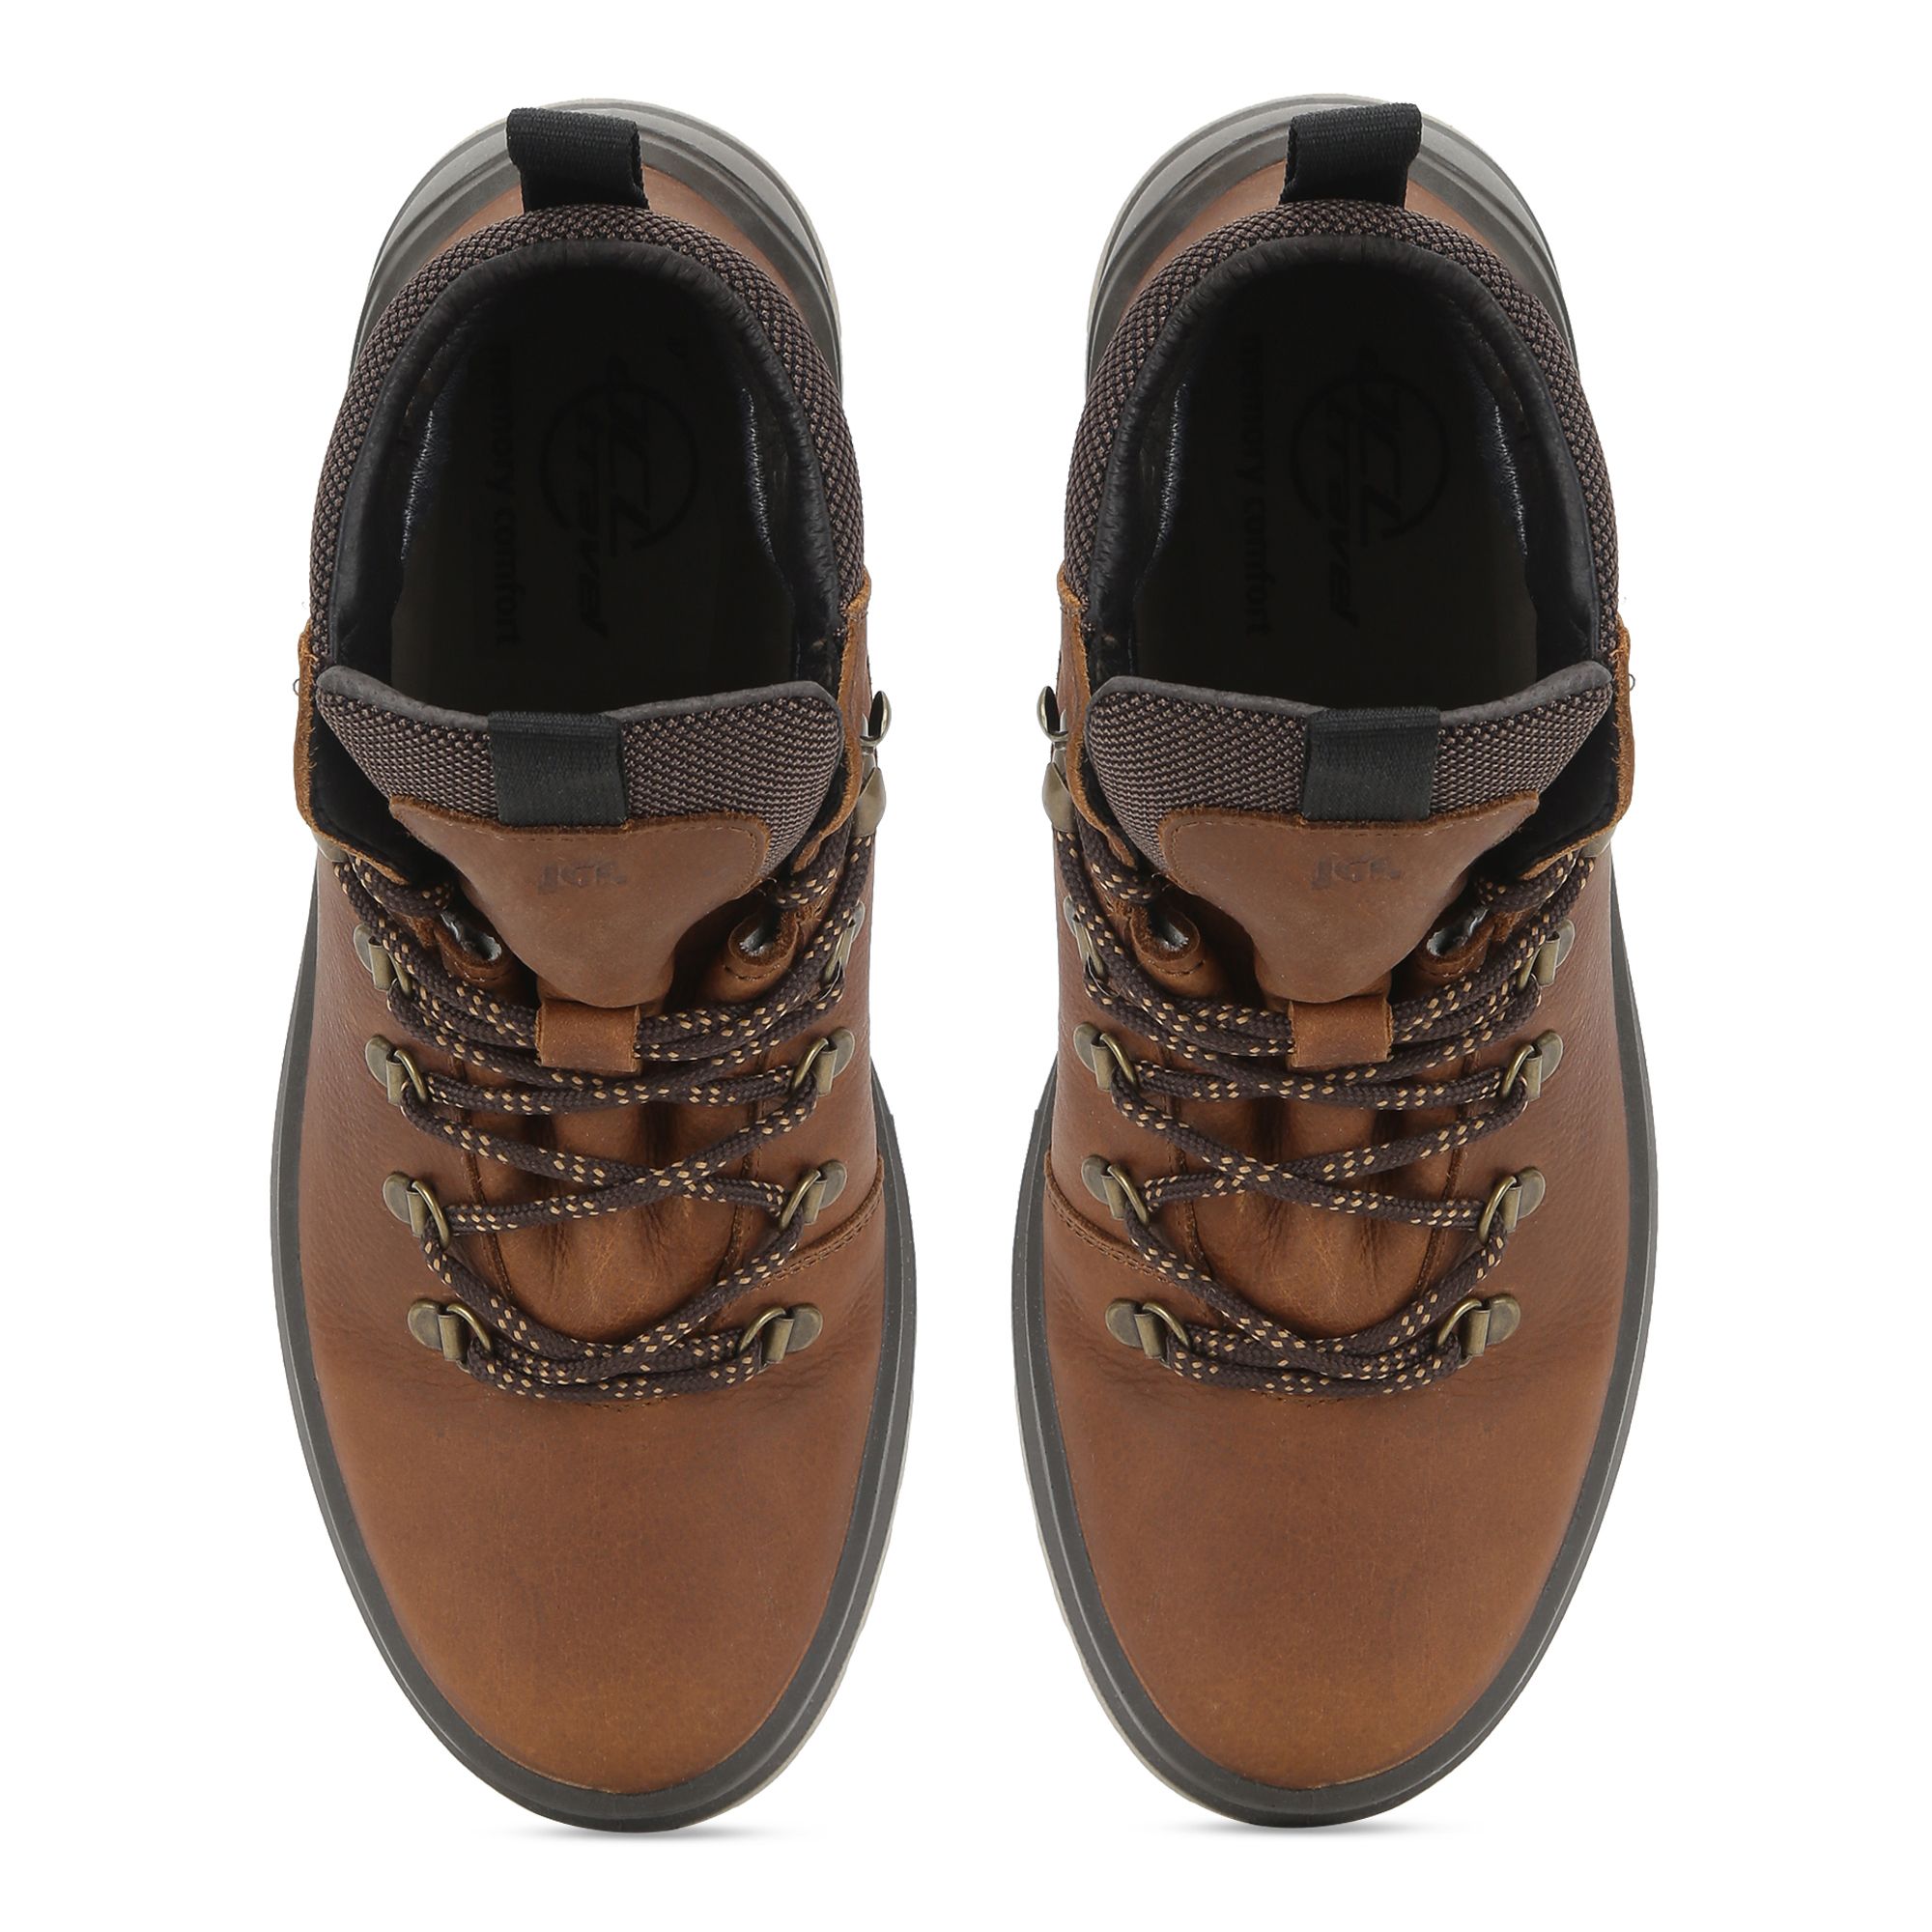 Brown boots for men